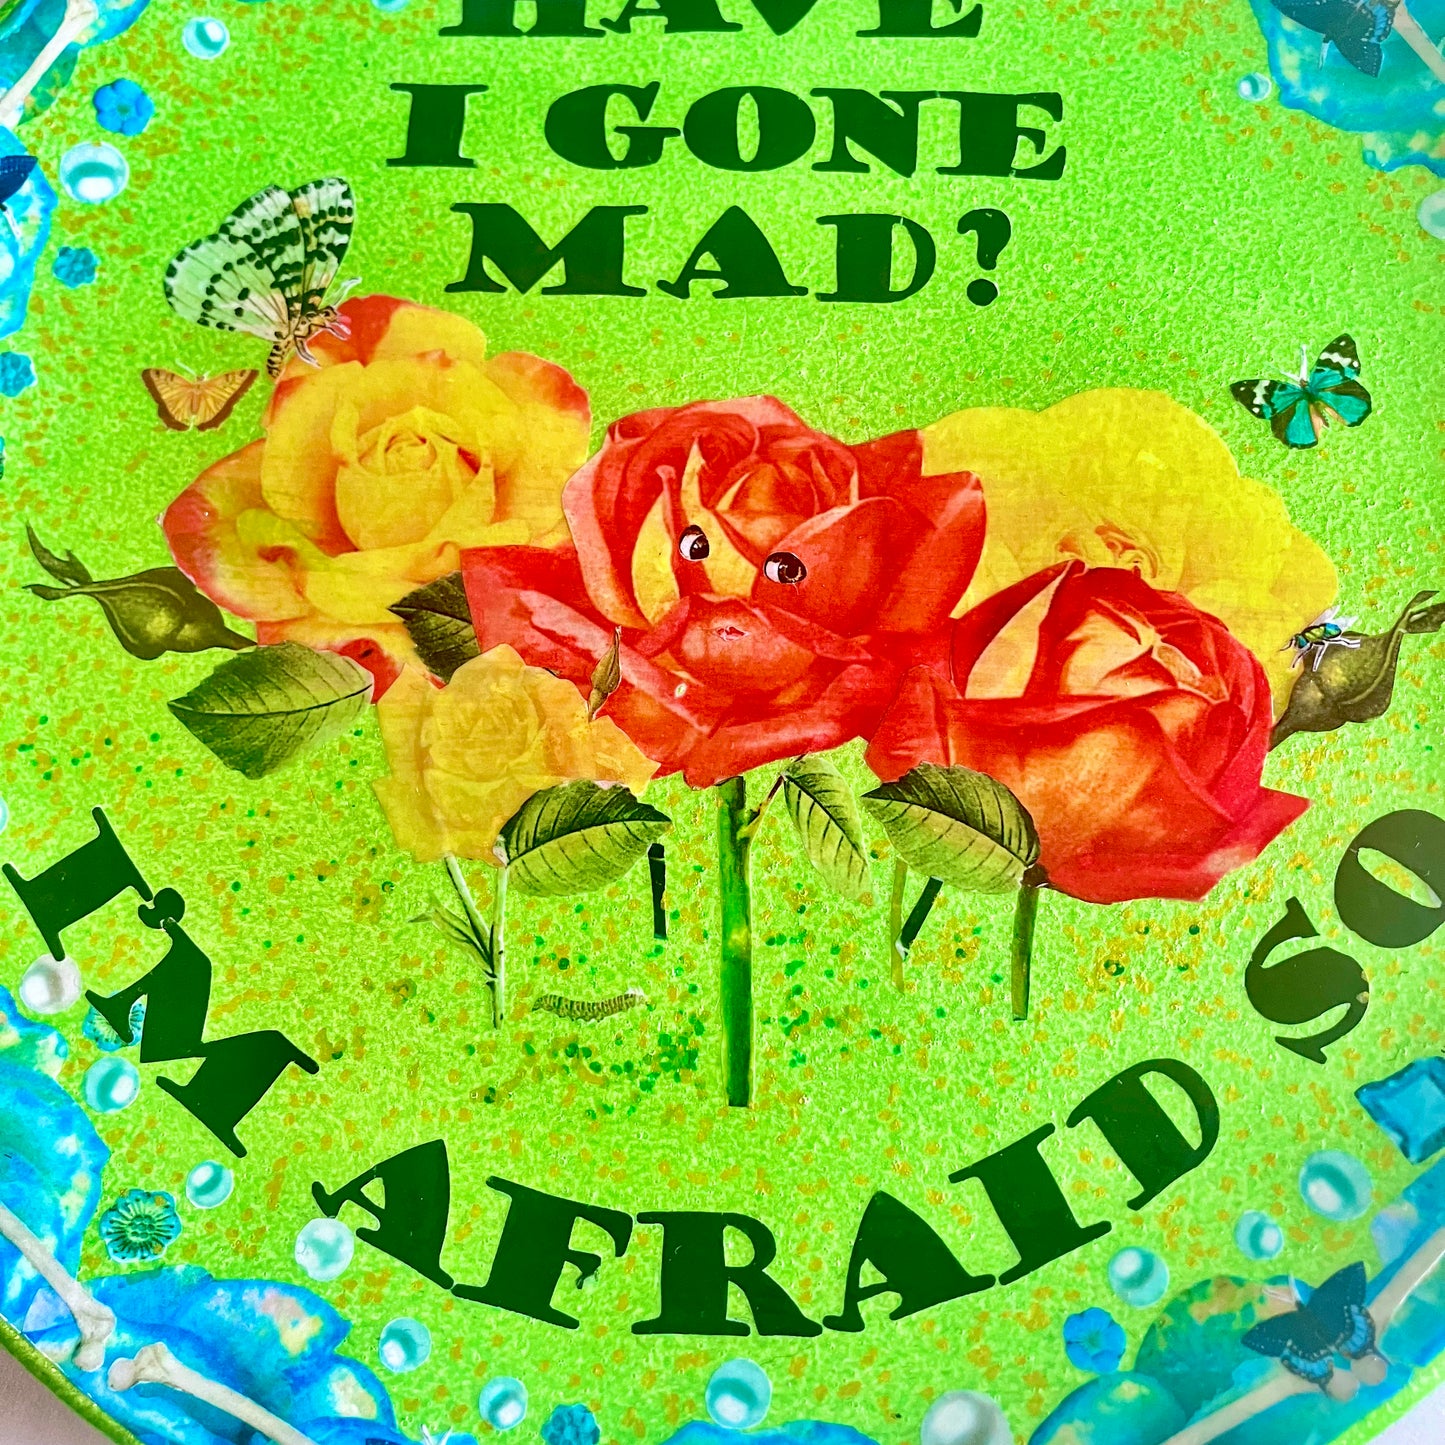 "Have I Gone Mad? I'm Afraid So" Wall Plate by House of Frisson closeup detail of the collage showing roses with faces, against a bright green background.